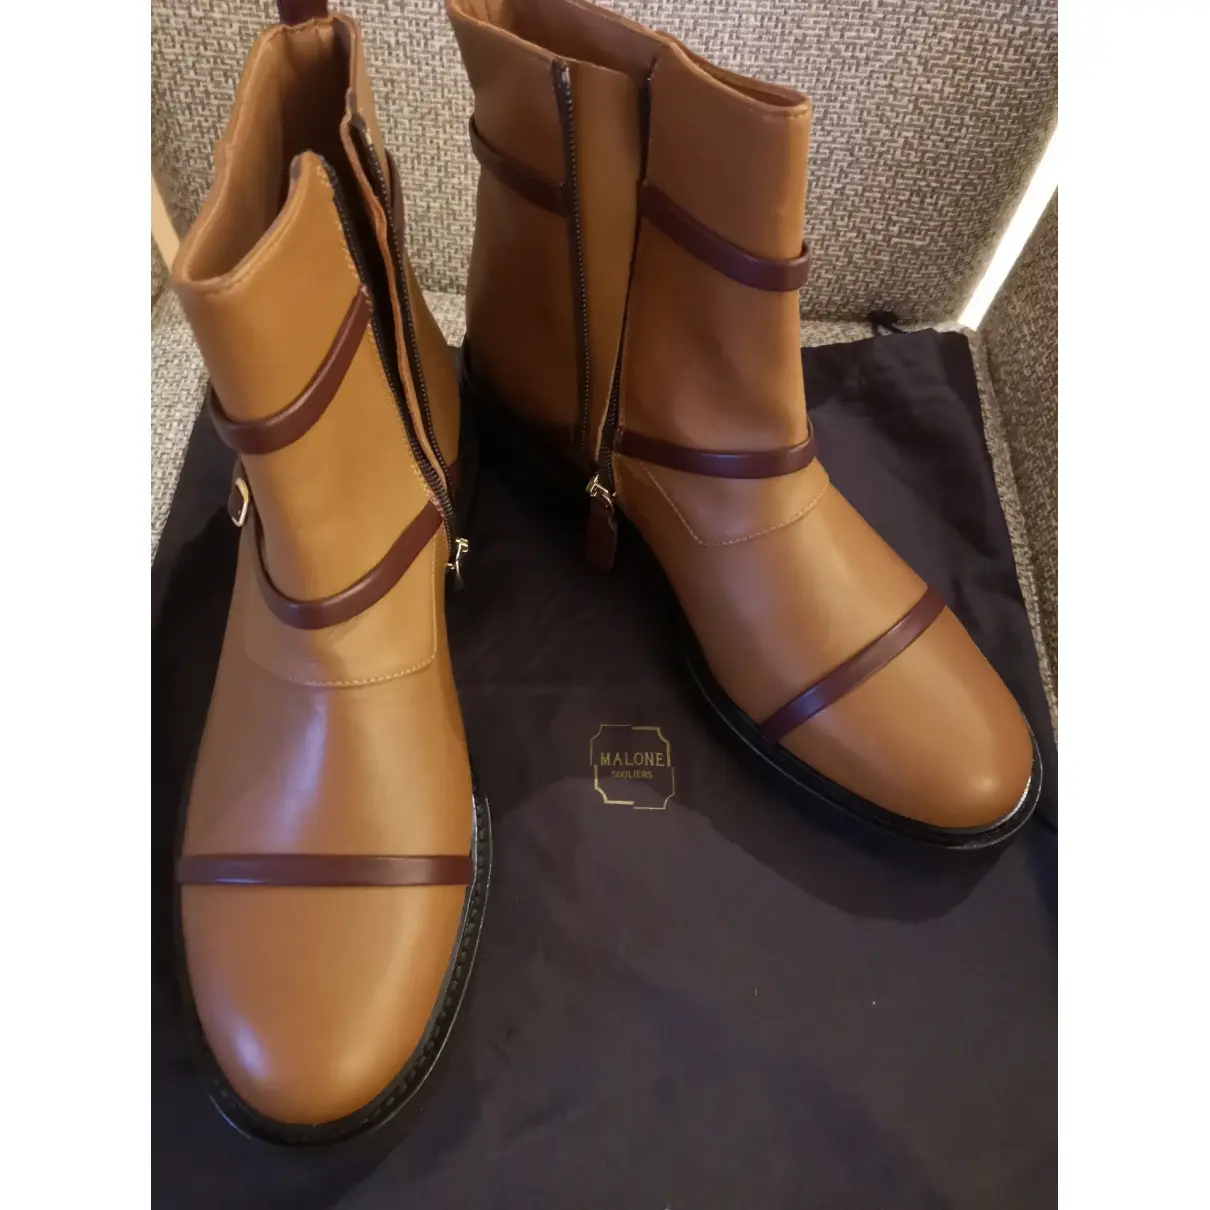 Buy Malone Souliers Leather ankle boots online